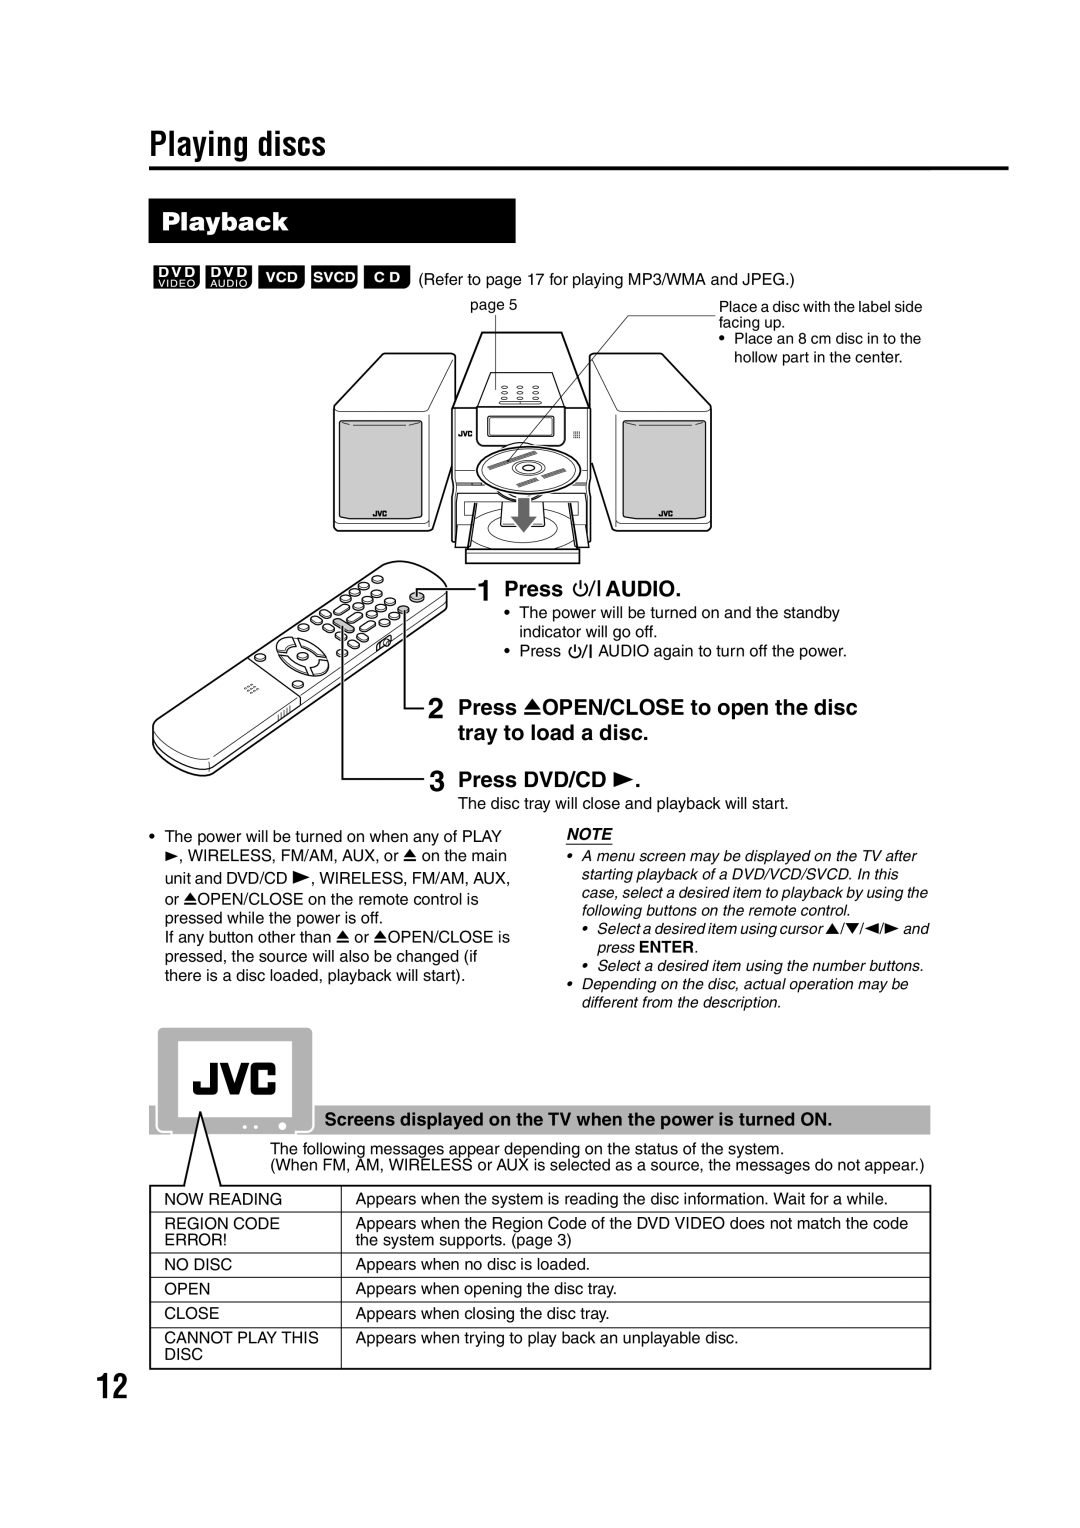 JVC GVT0144-005A Playing discs, Playback, Audio, Press 0OPEN/CLOSE to open the disc, tray to load a disc, Press DVD/CD 